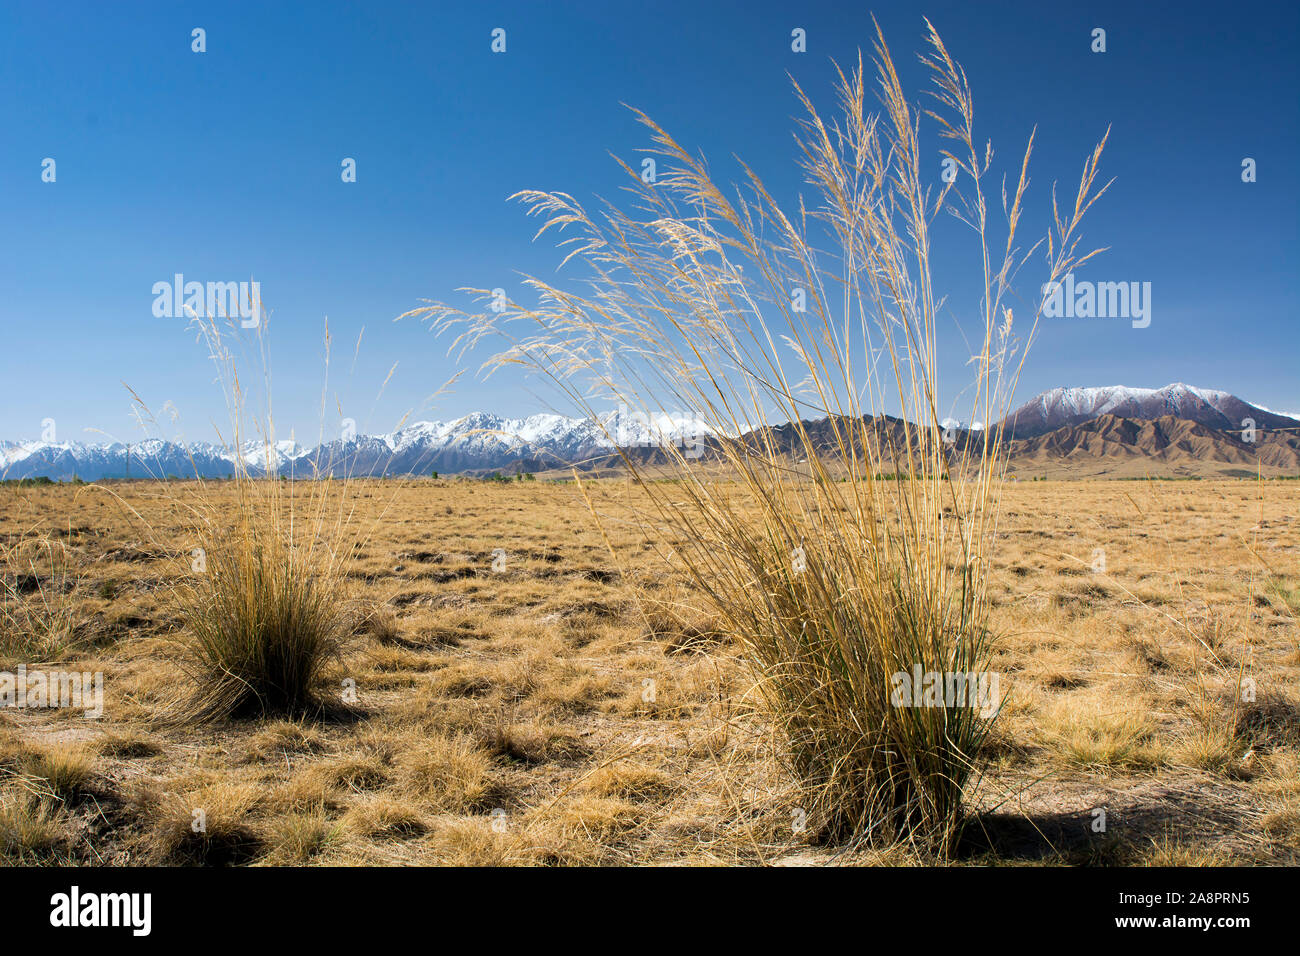 The Qilian Mountain seen from a vast steppe near Zhangye, China Stock Photo